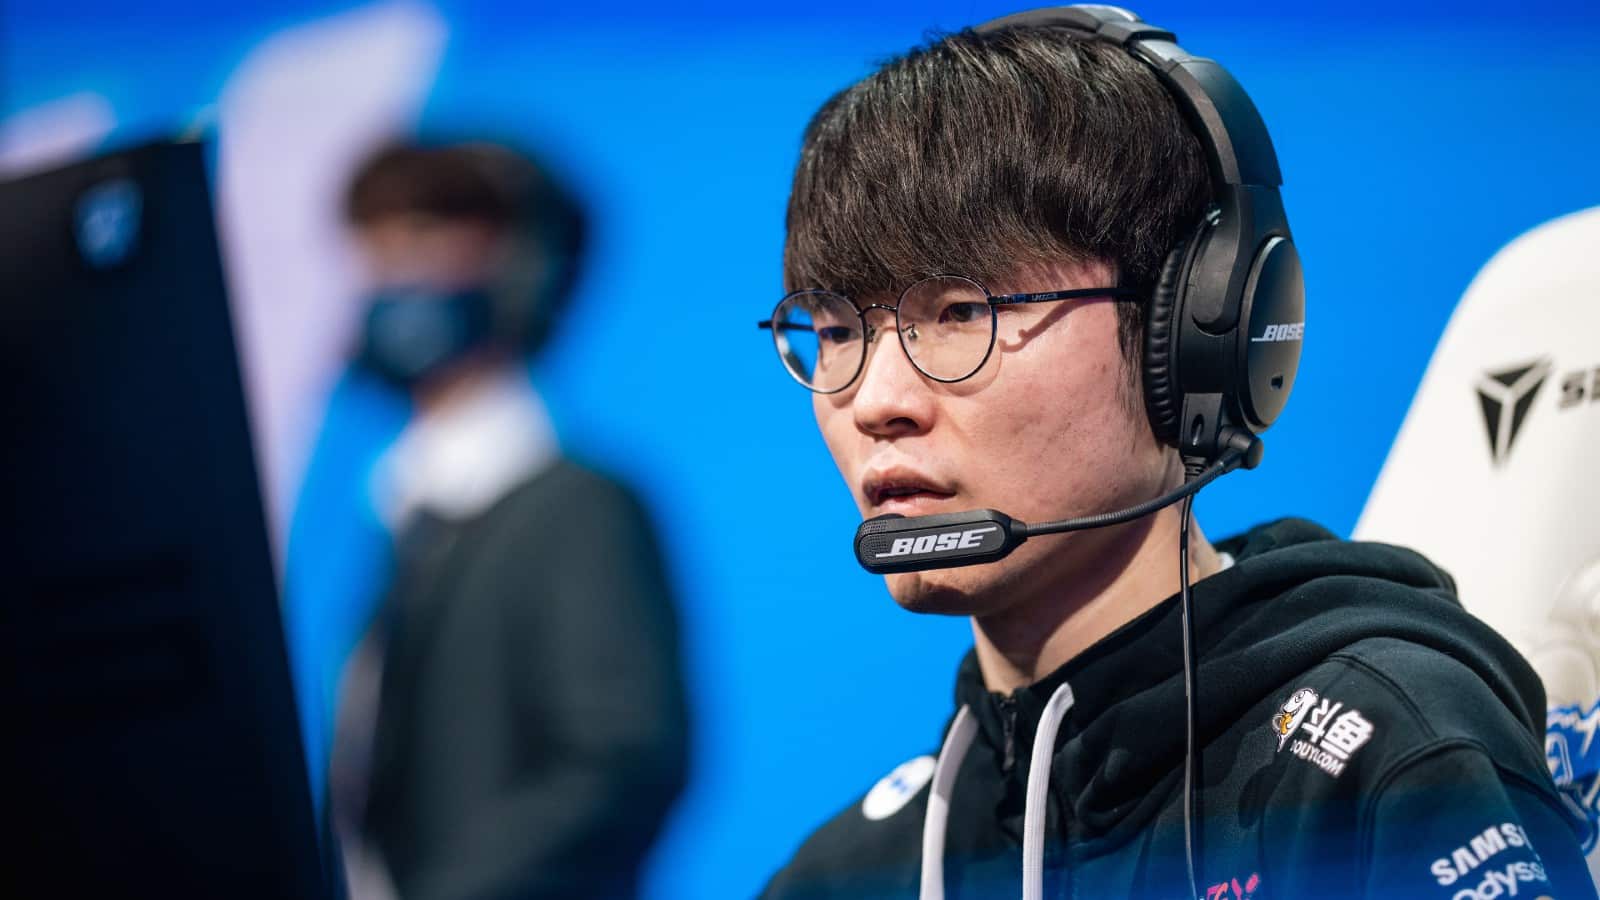 Faker competing at Worlds 2021